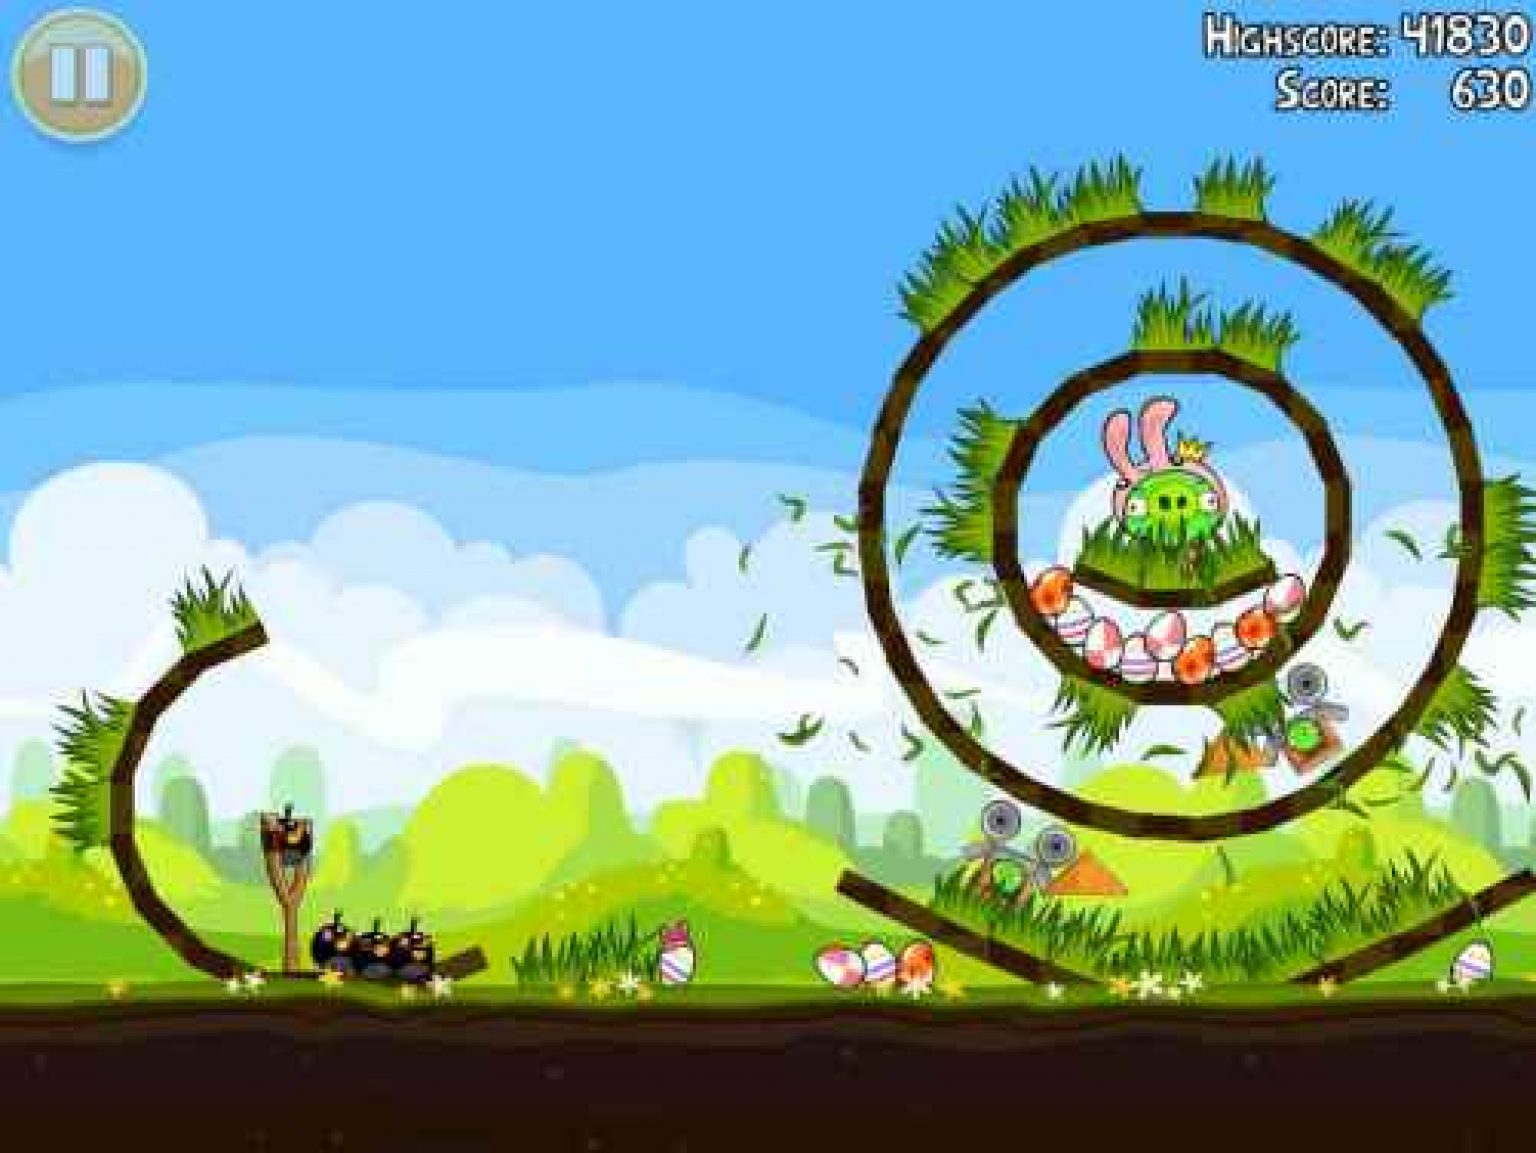 angry birds game free download for pc full version with crack